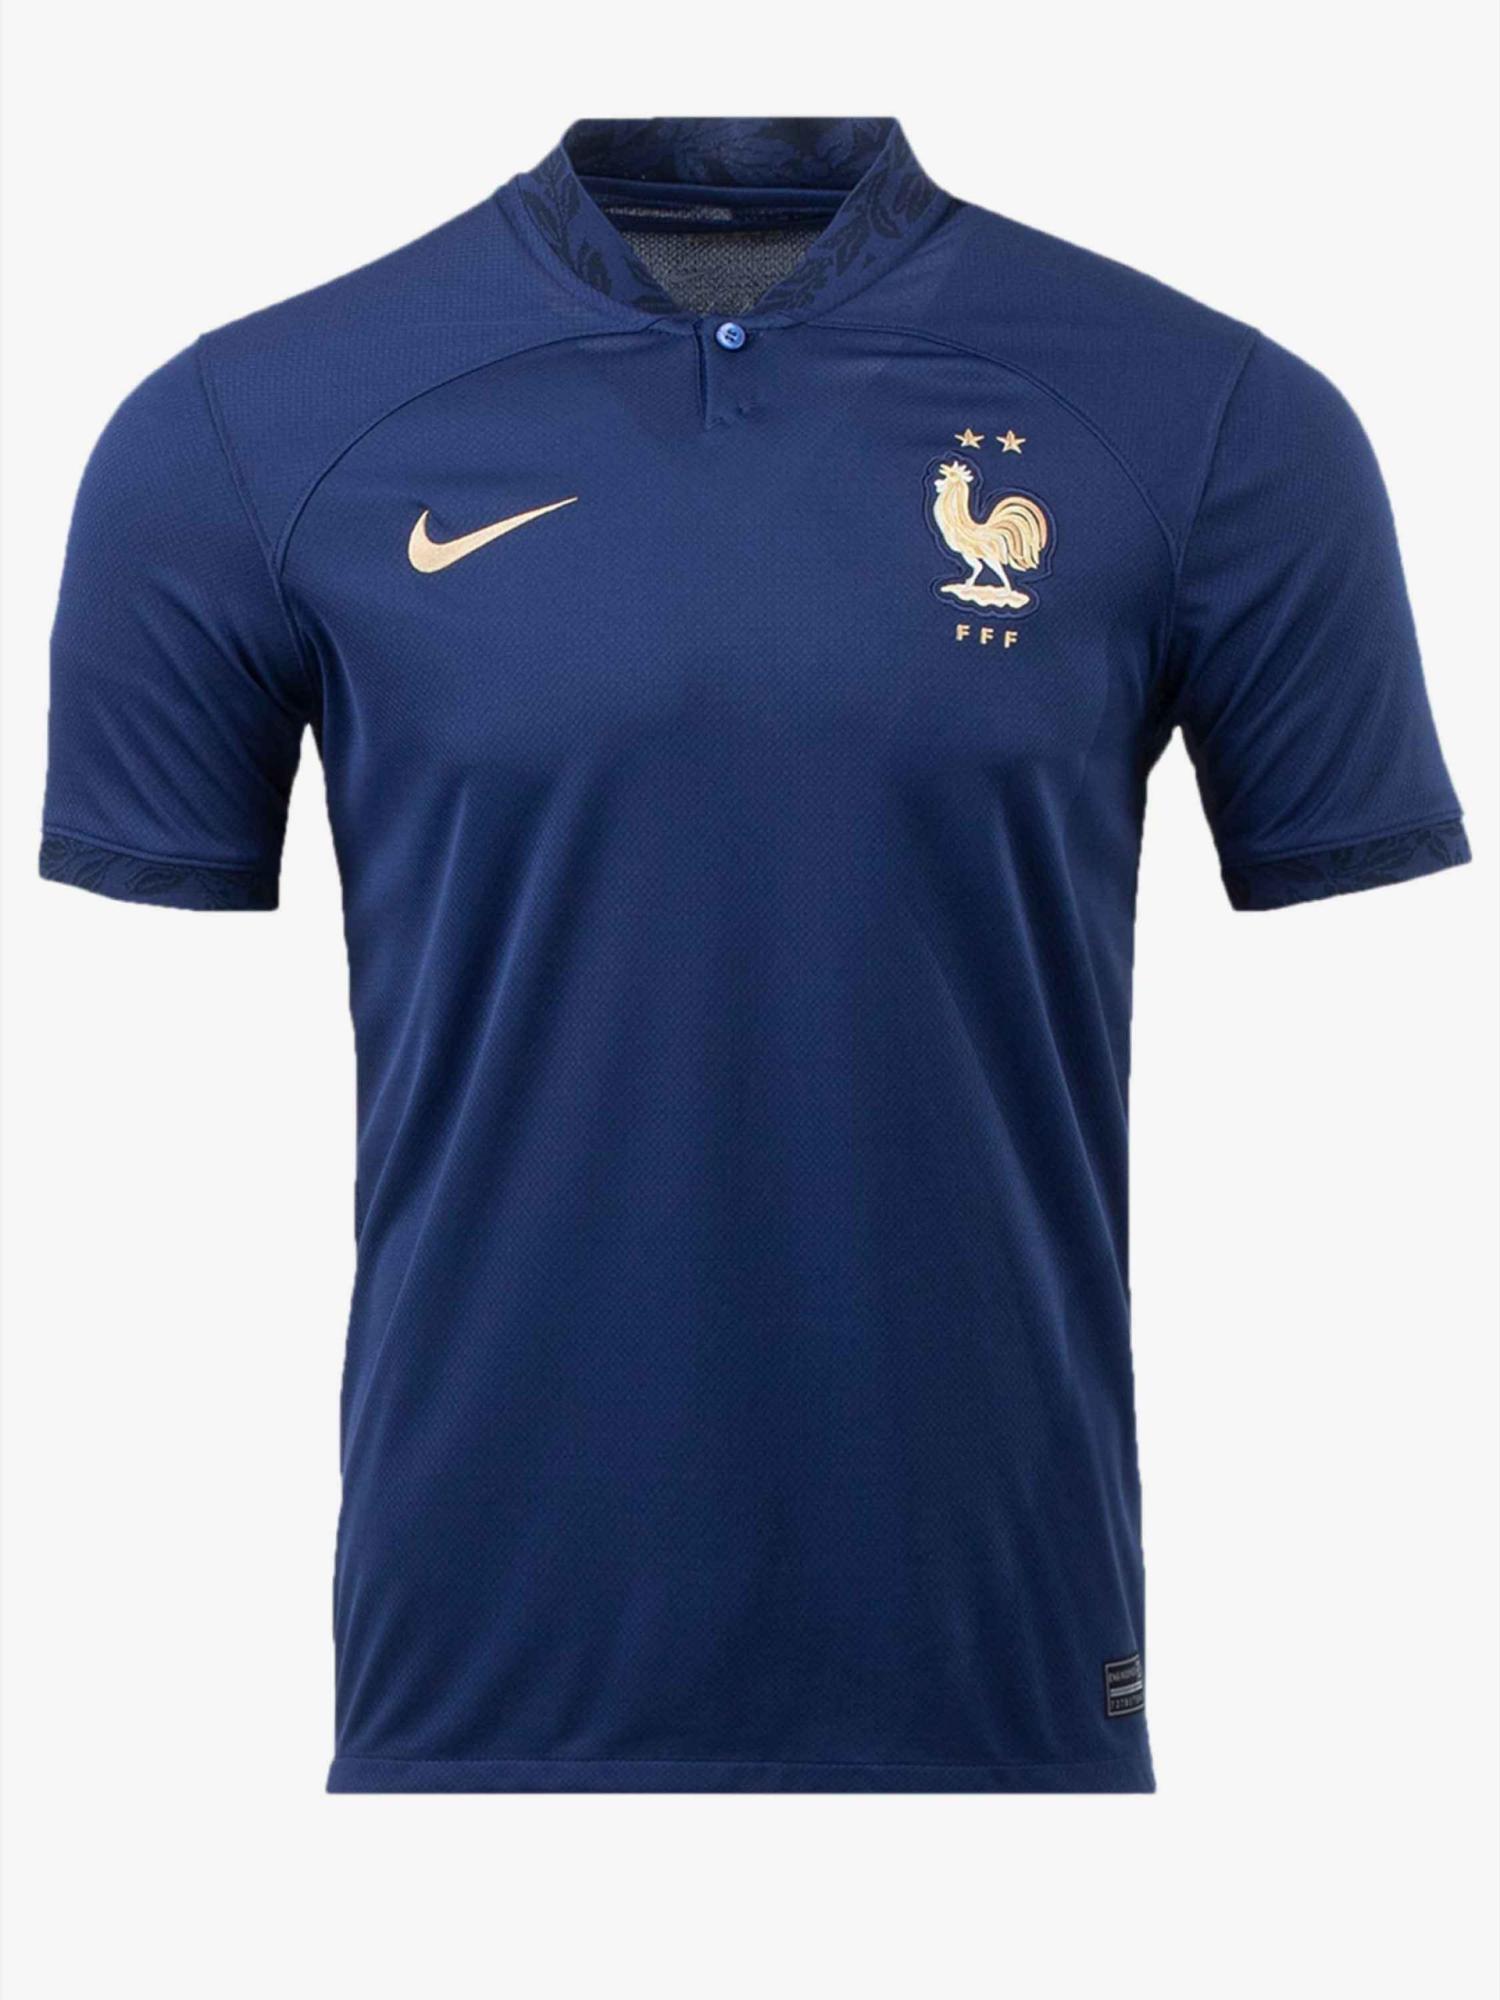 France Home 2022 World Cup Football Jersey Player Edition.